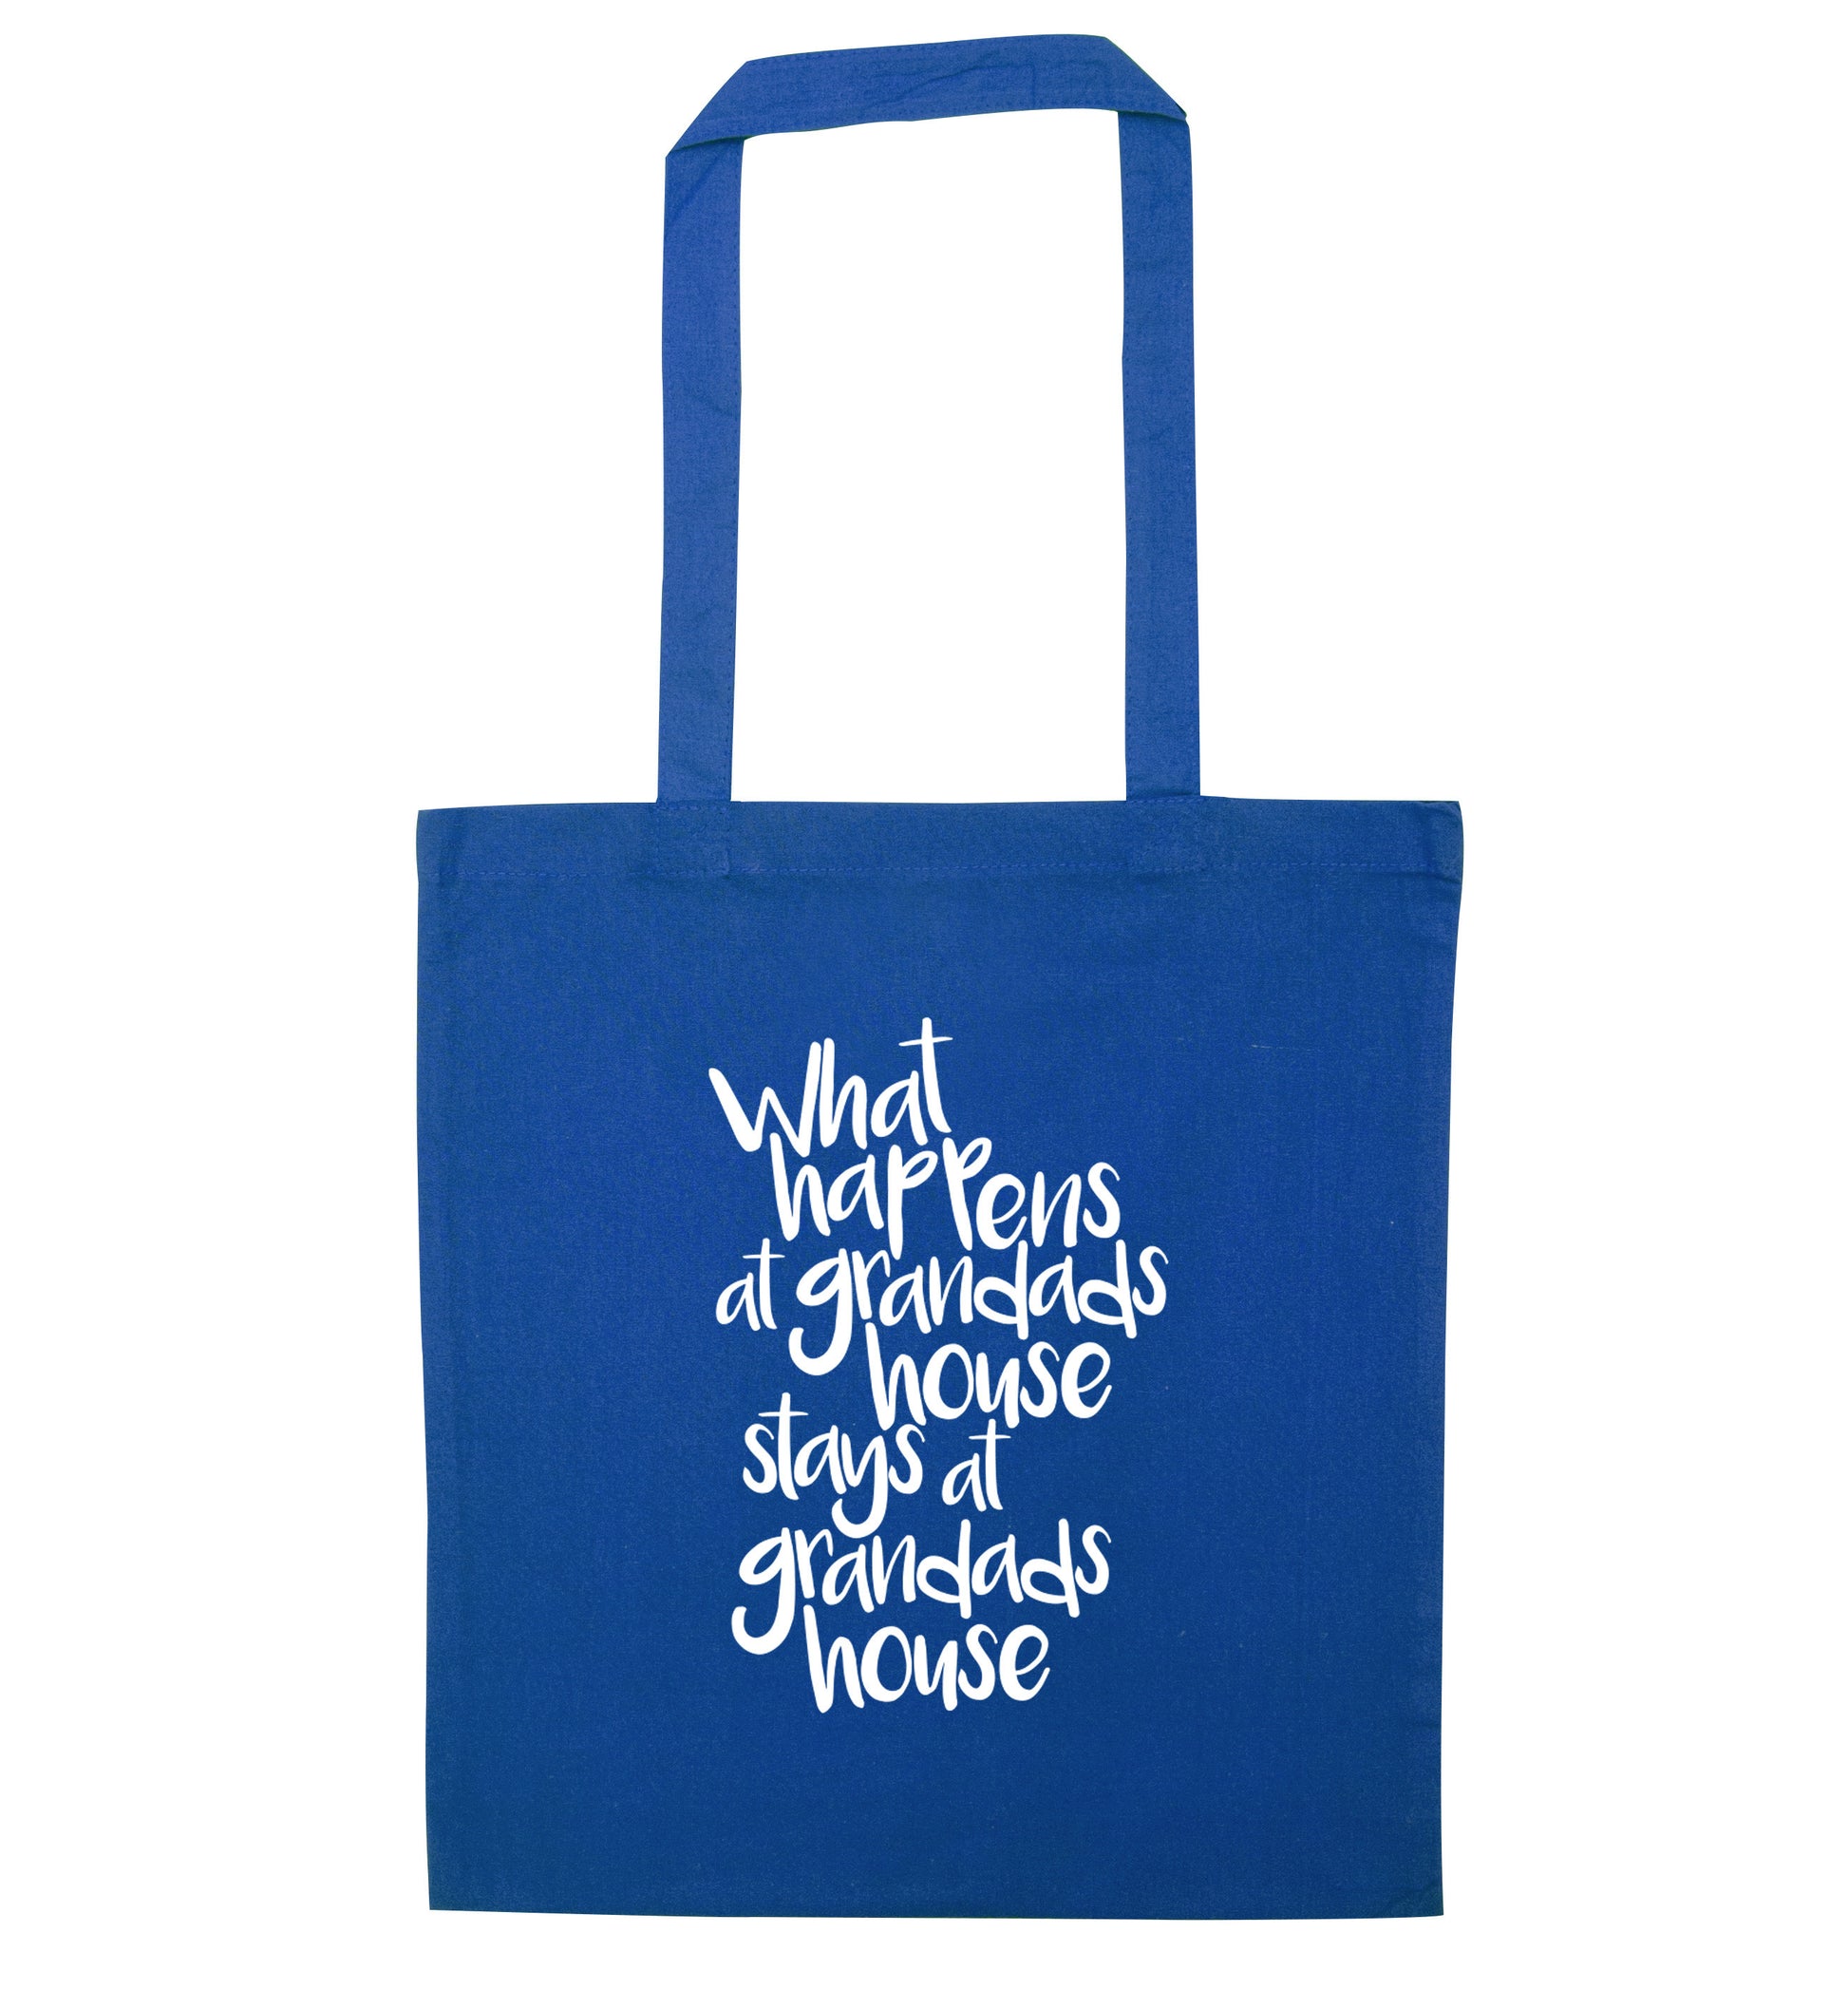 What happens at grandads house stays at grandads house blue tote bag